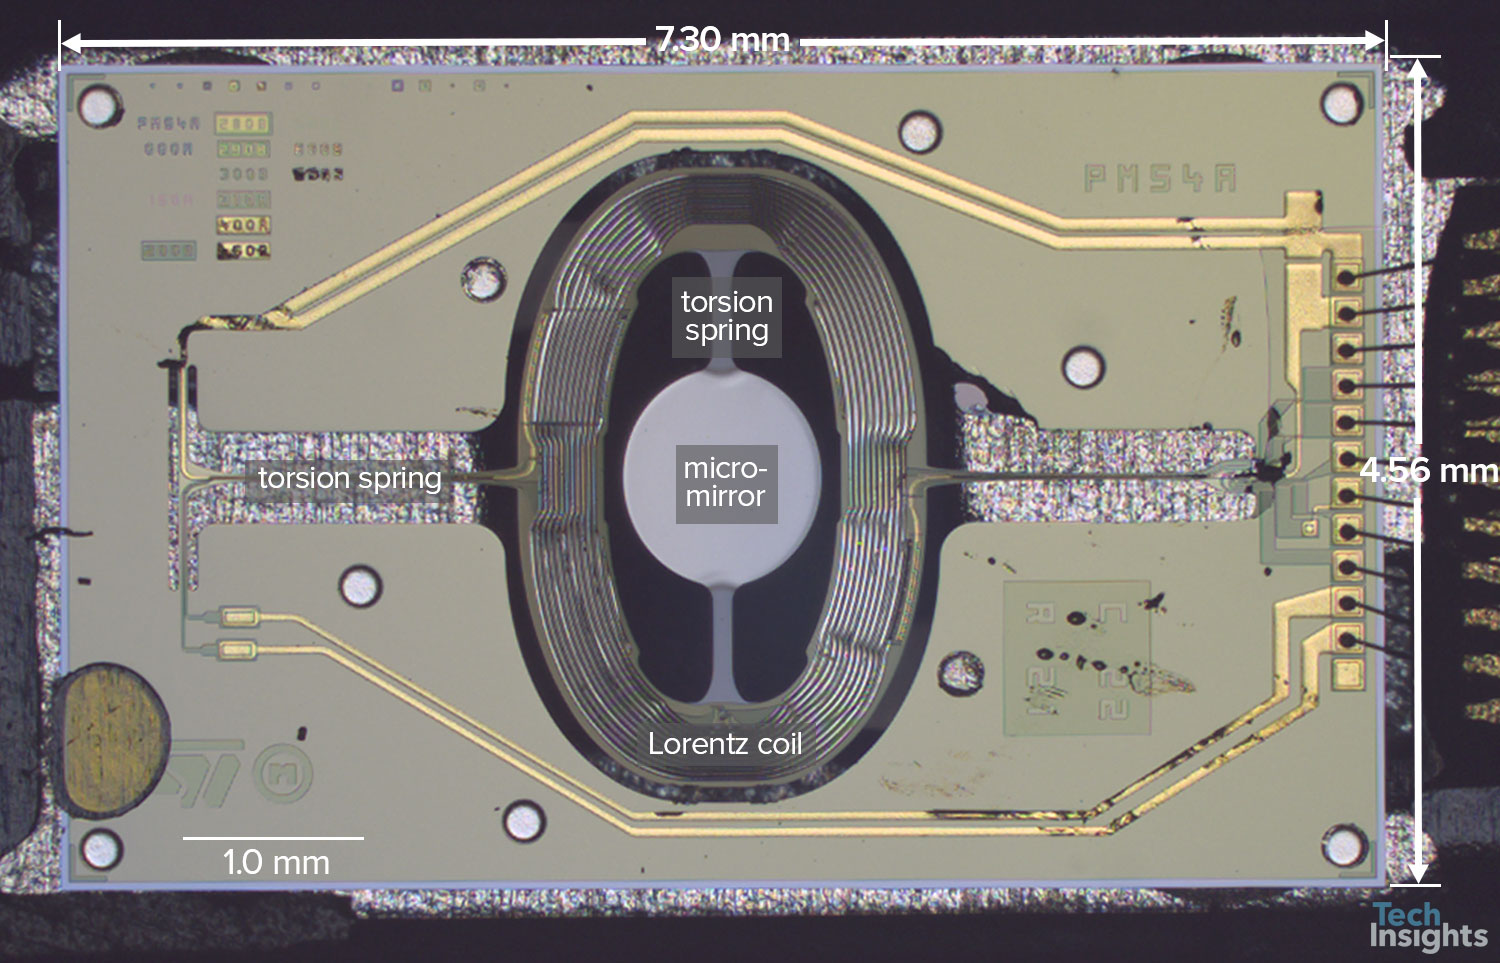 Figure 6: MicroVision/STMicroelectronics PM54A Micromirror Die